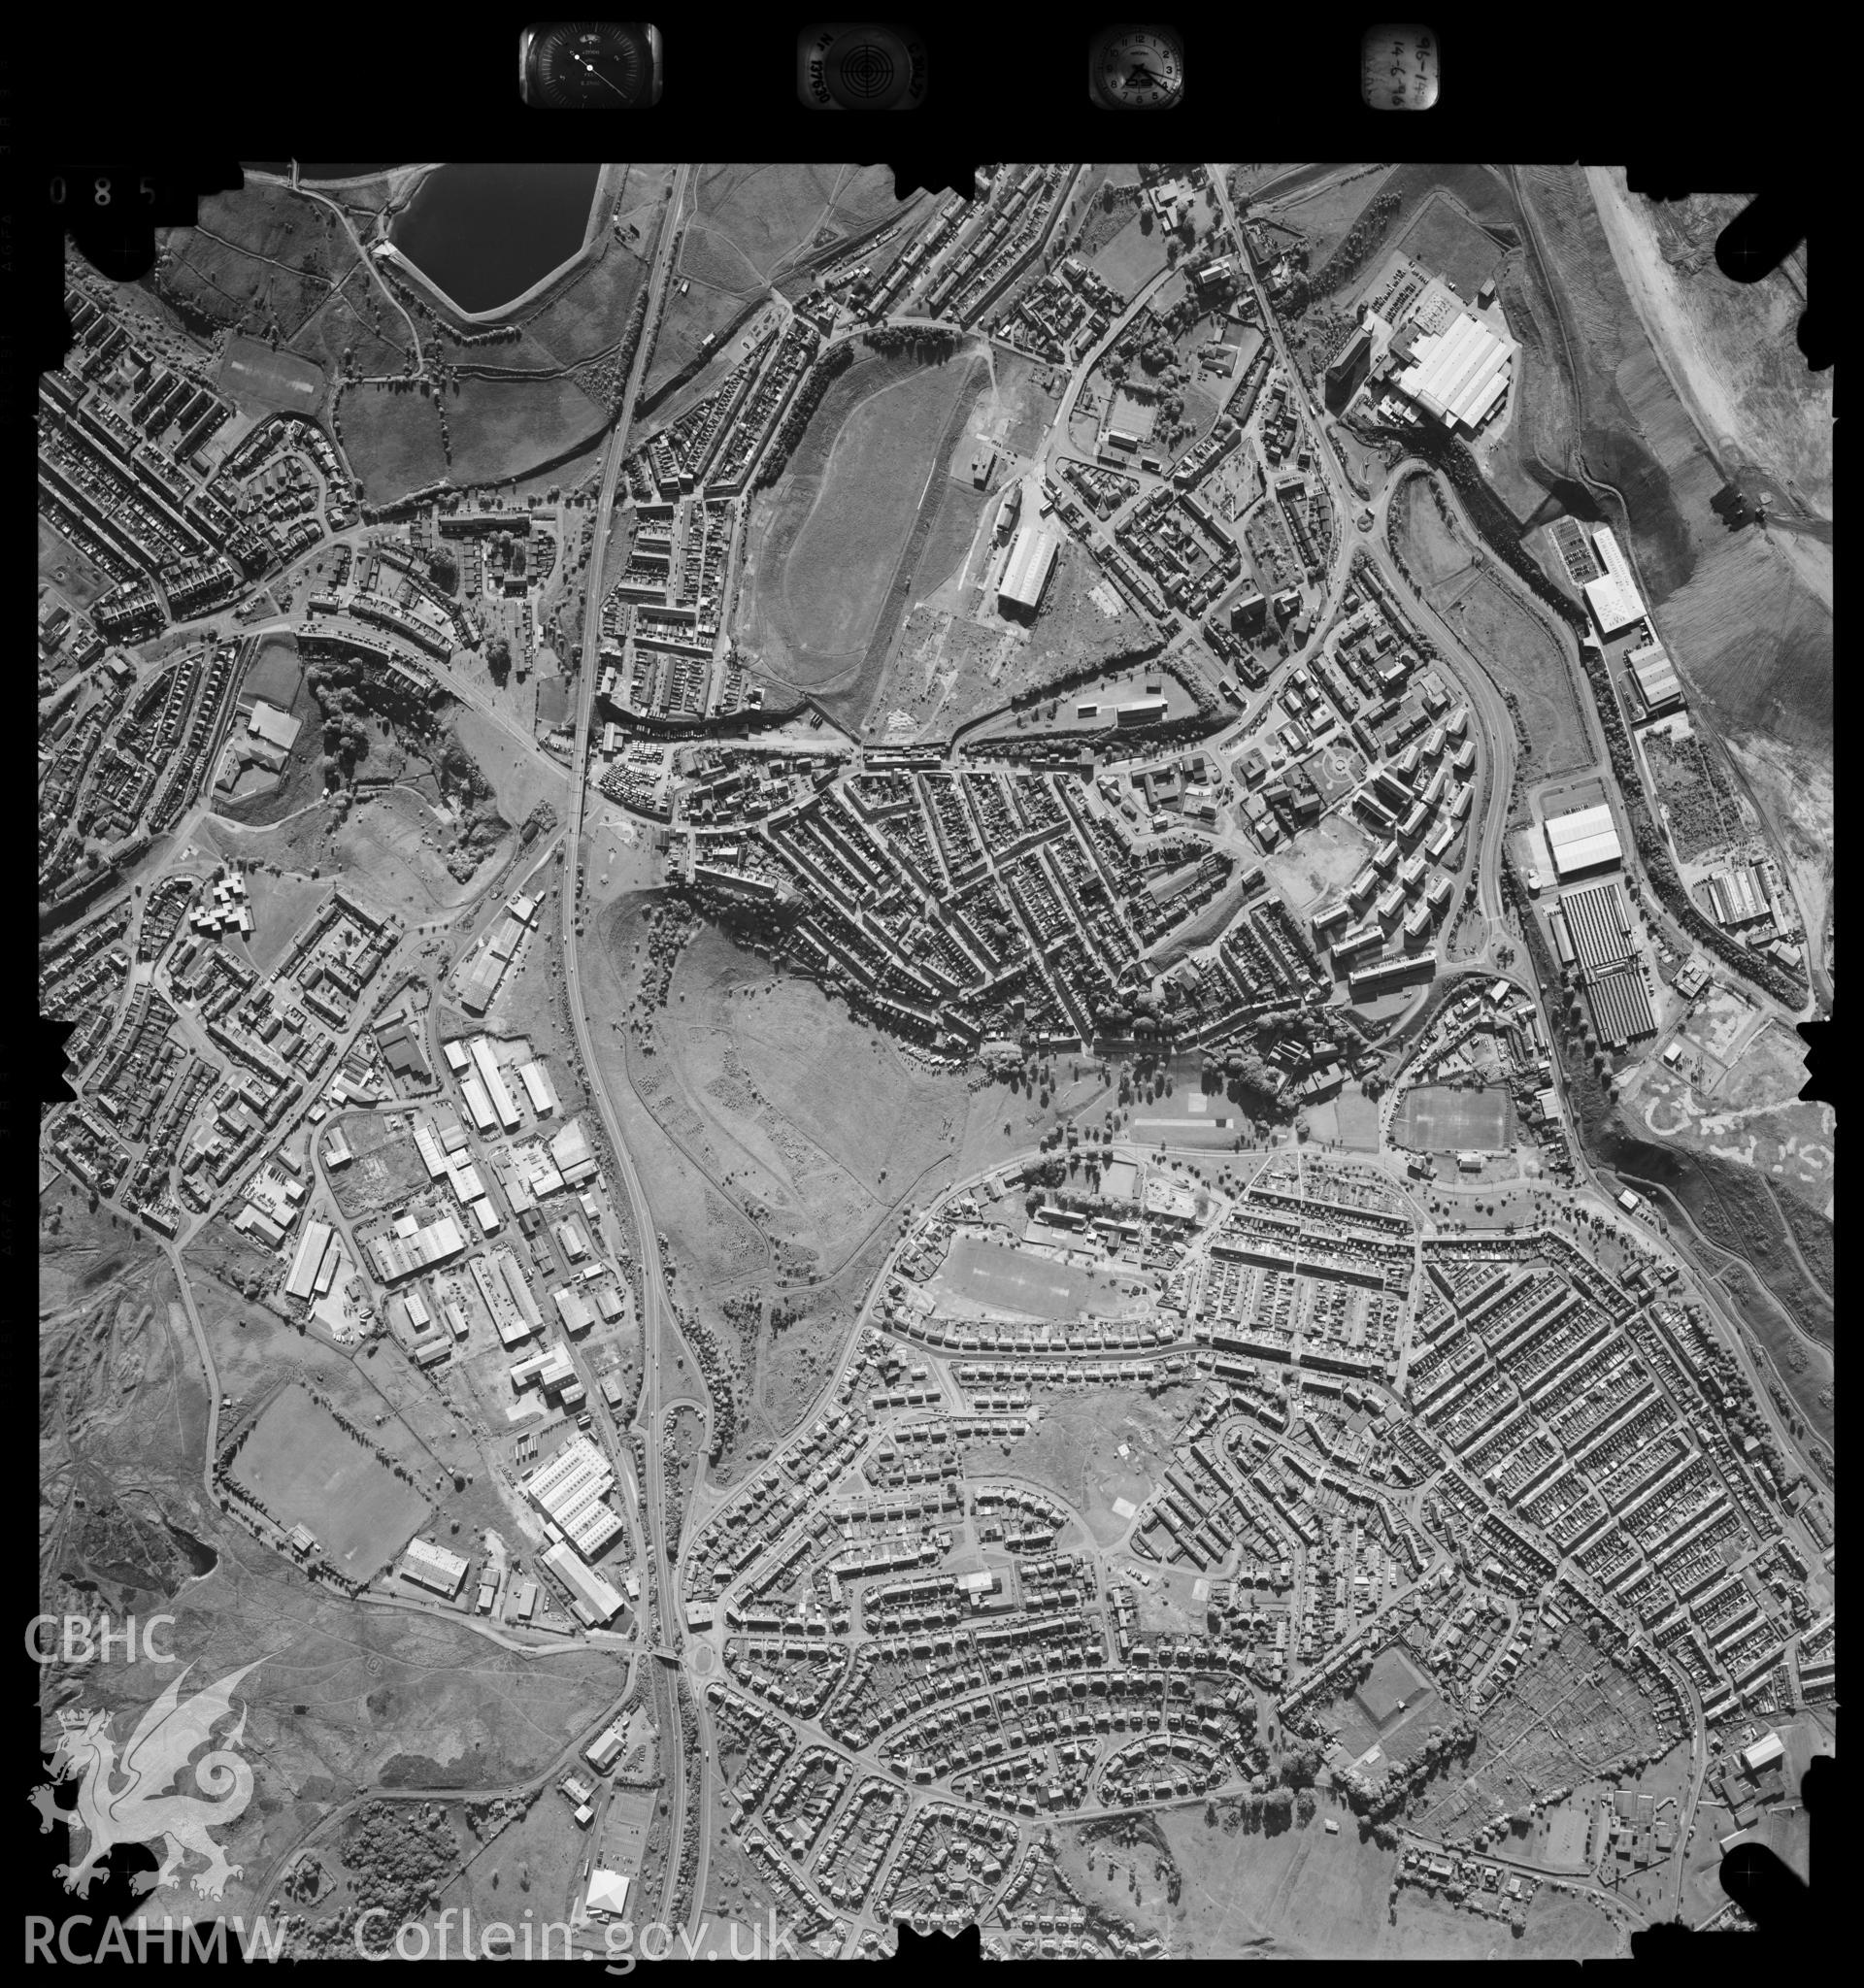 Digitized copy of an aerial photograph showing Dowlais area, taken by Ordnance Survey, 1996